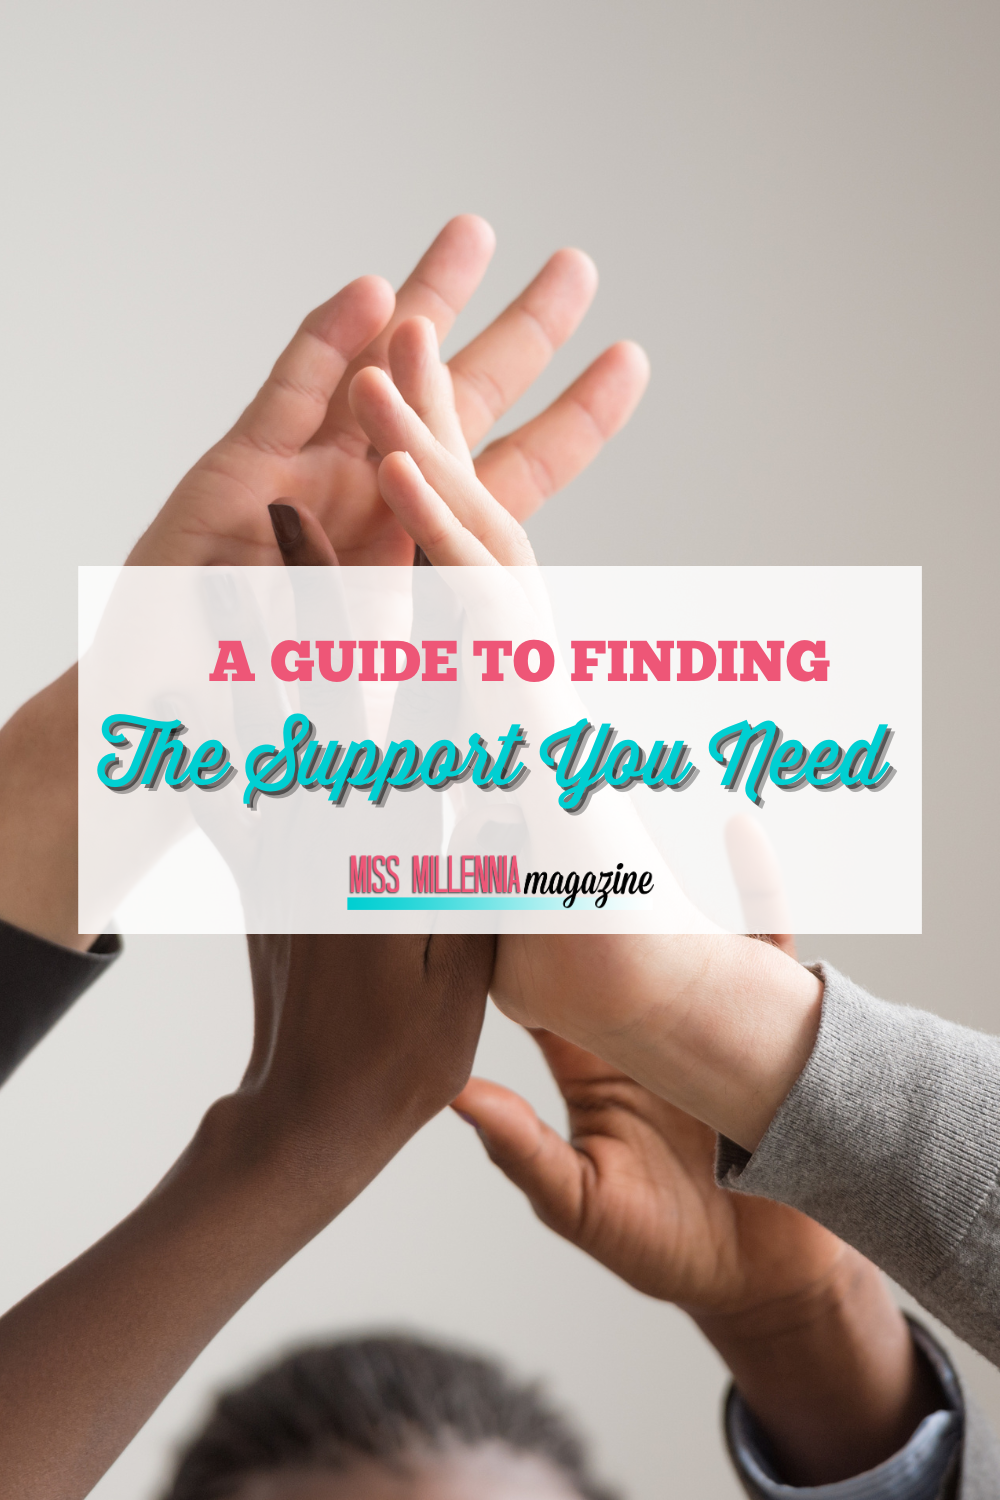 A Guide to Finding the Support You Need